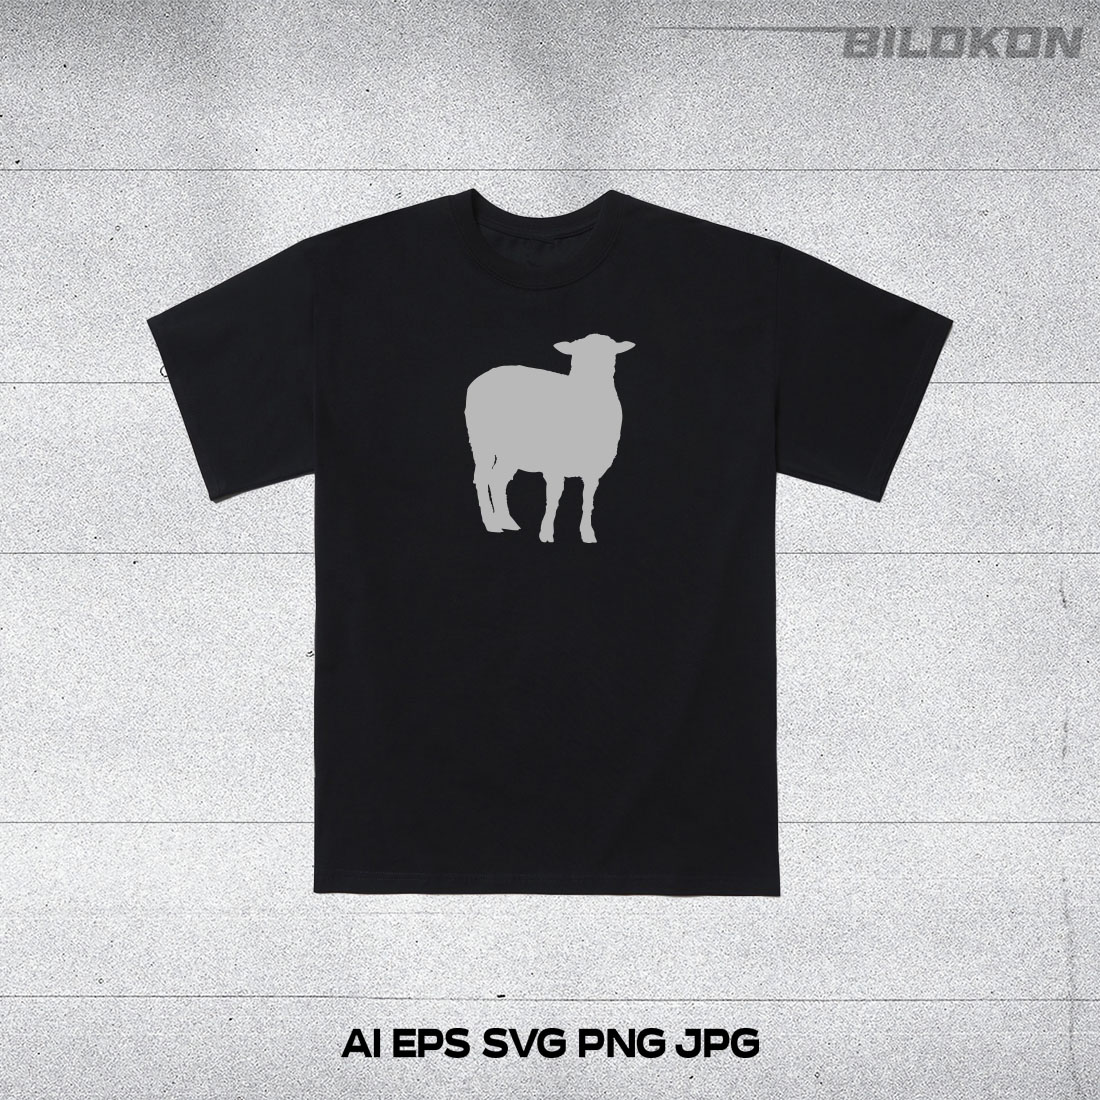 Black t - shirt with a white llama on it.